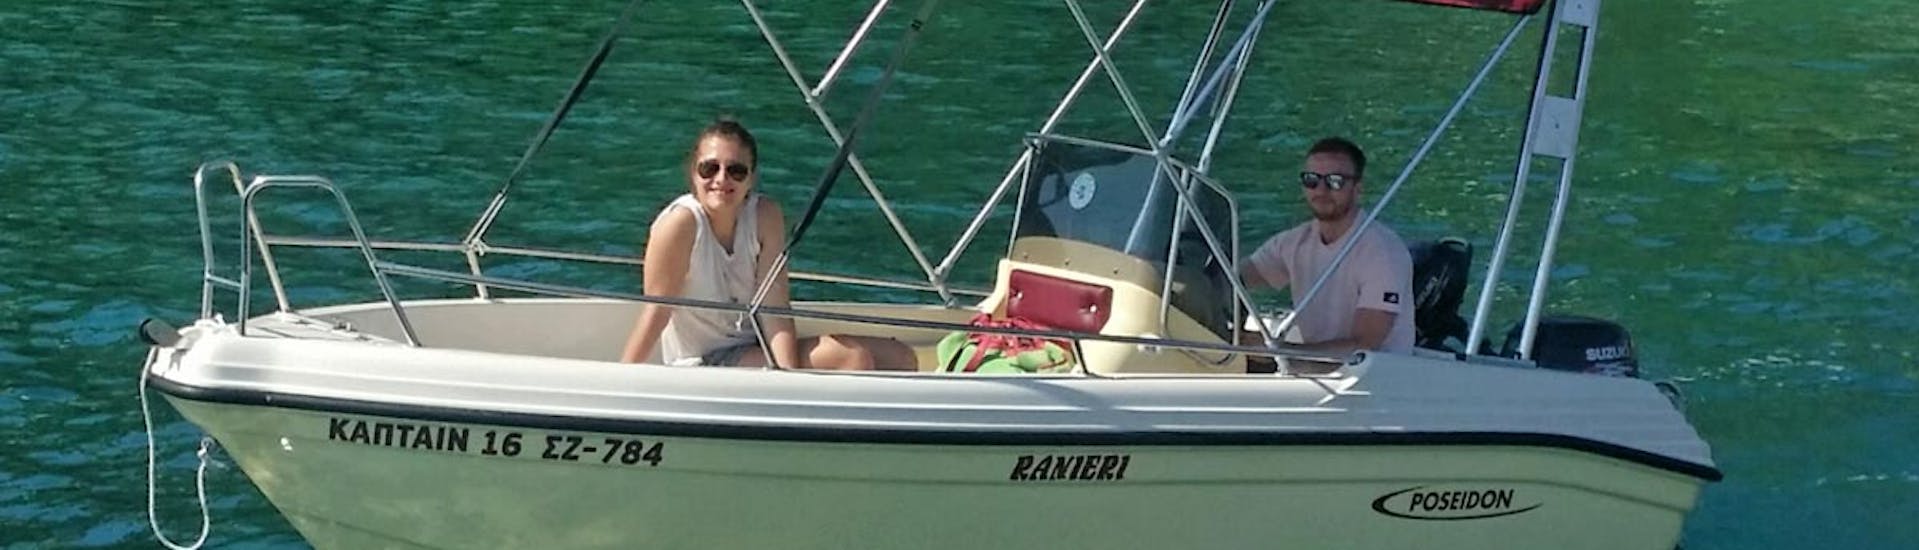 People aboard our mini luxury boat during a Boat Rental in Keri (up to 4 people) with Captain's Motorboat Rentals.